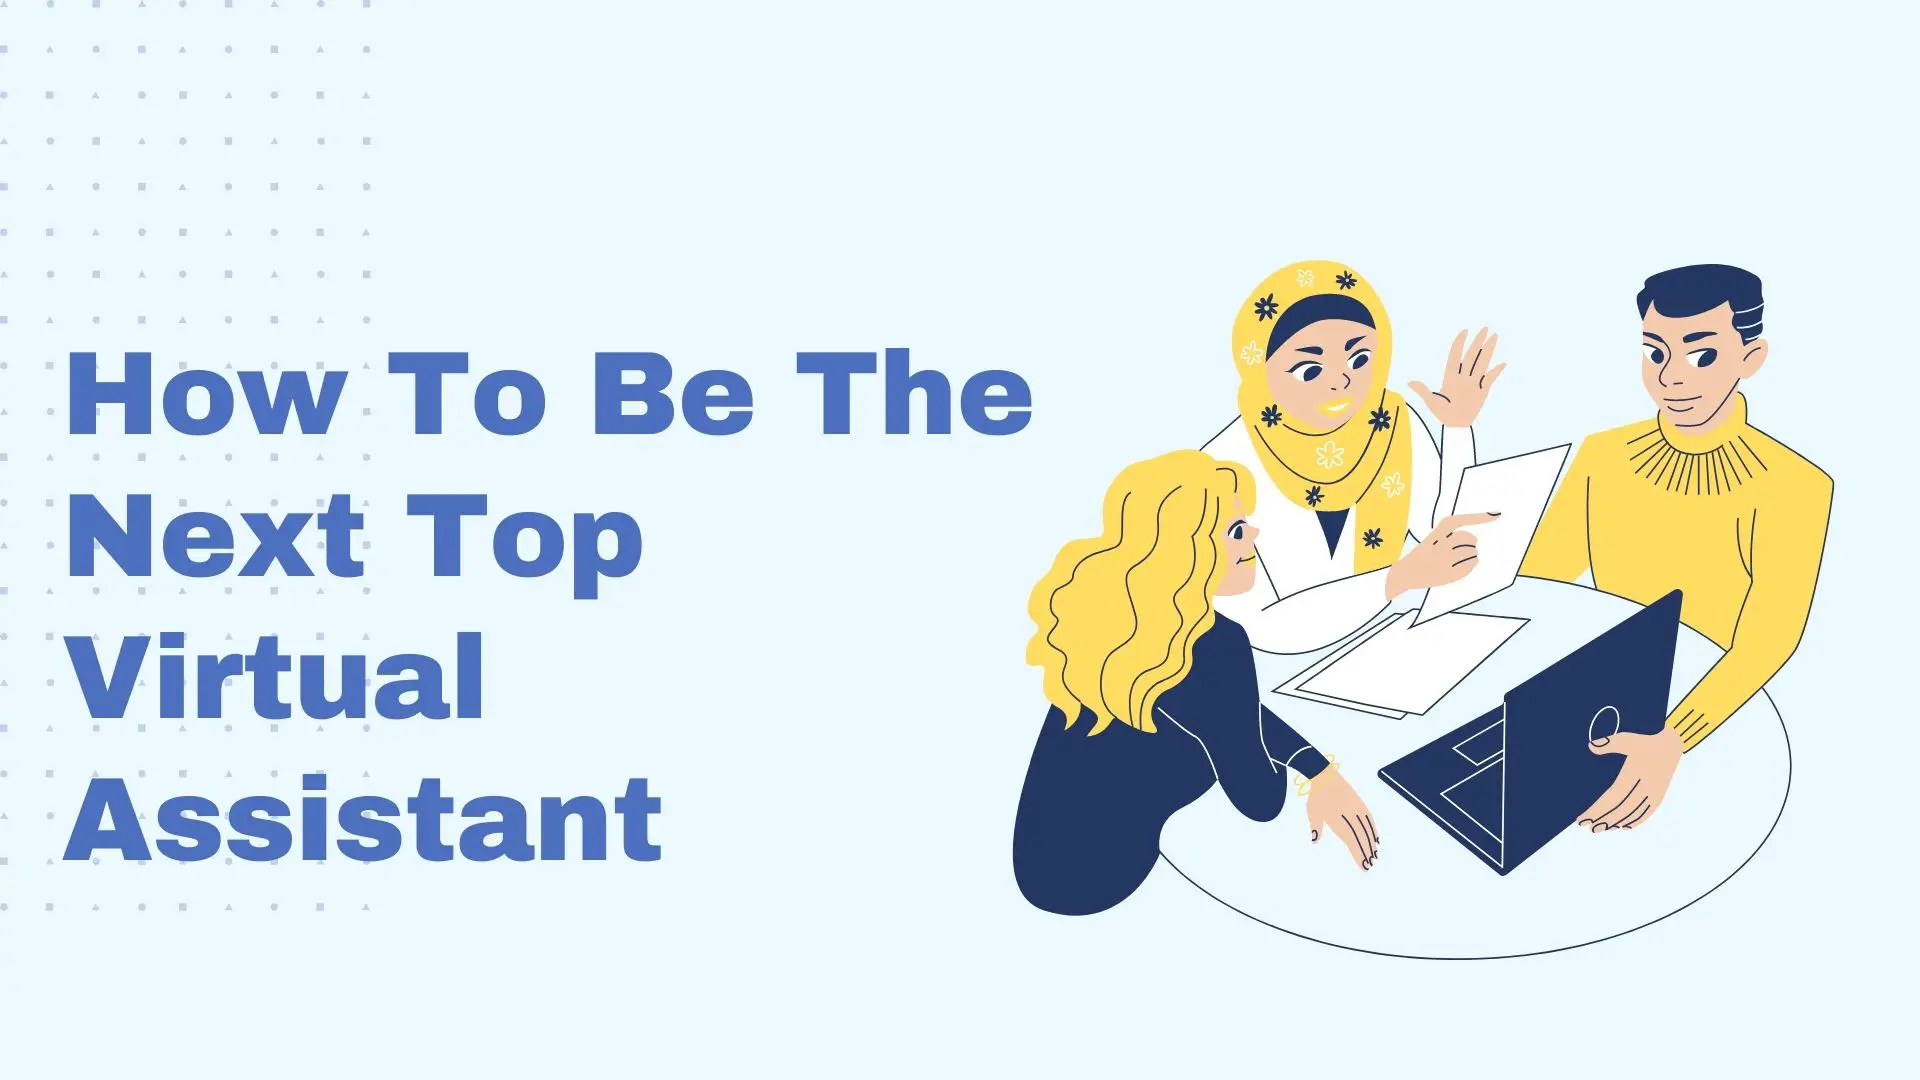 How To Be The Next Top Virtual Assistant